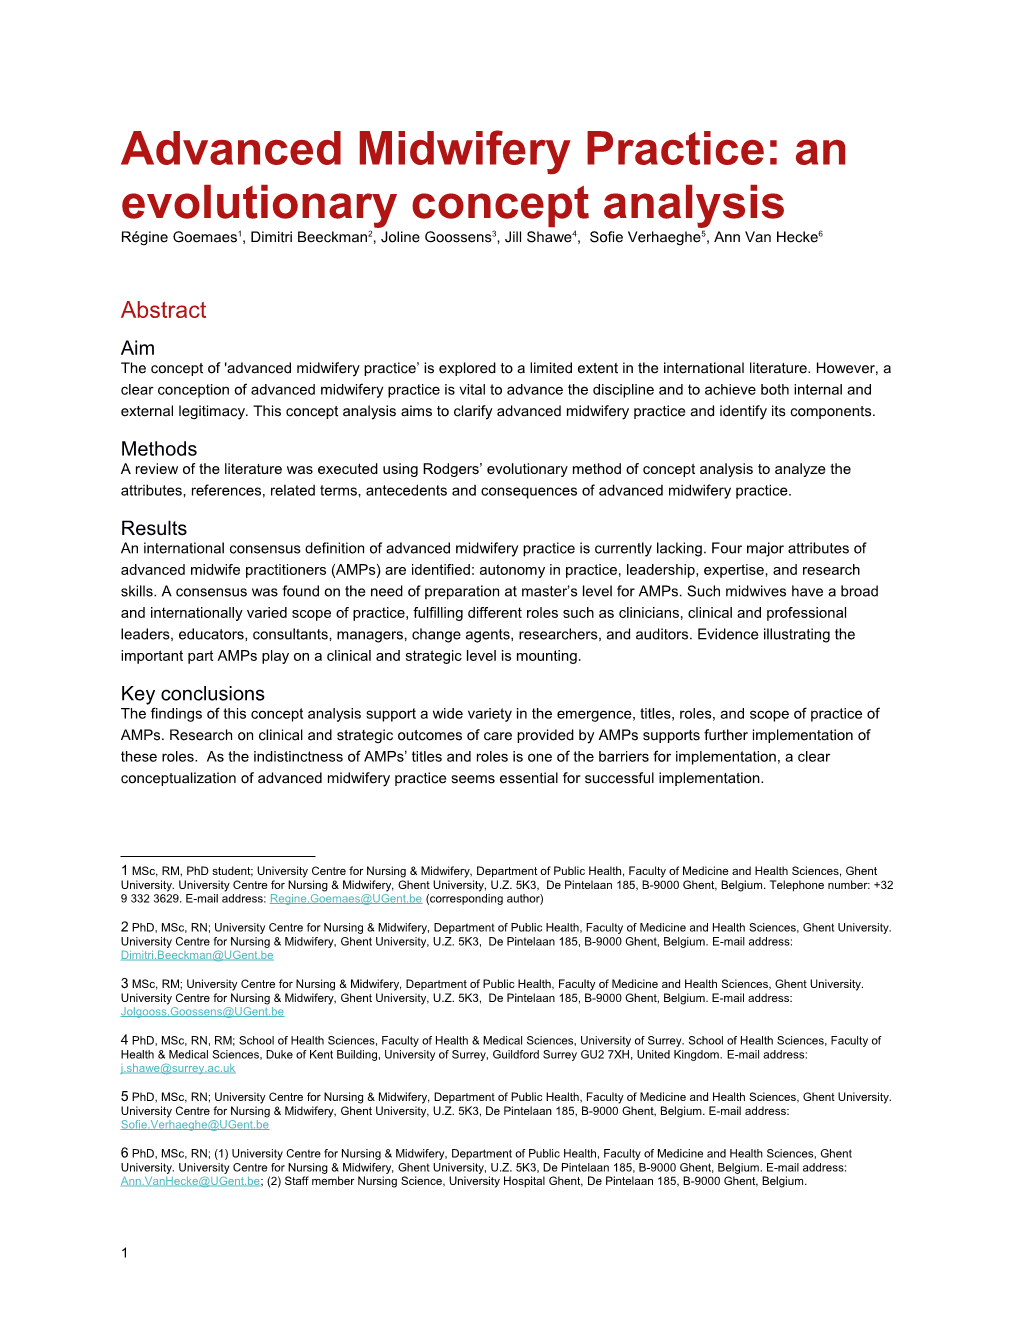 Advanced Midwifery Practice: an Evolutionary Concept Analysis